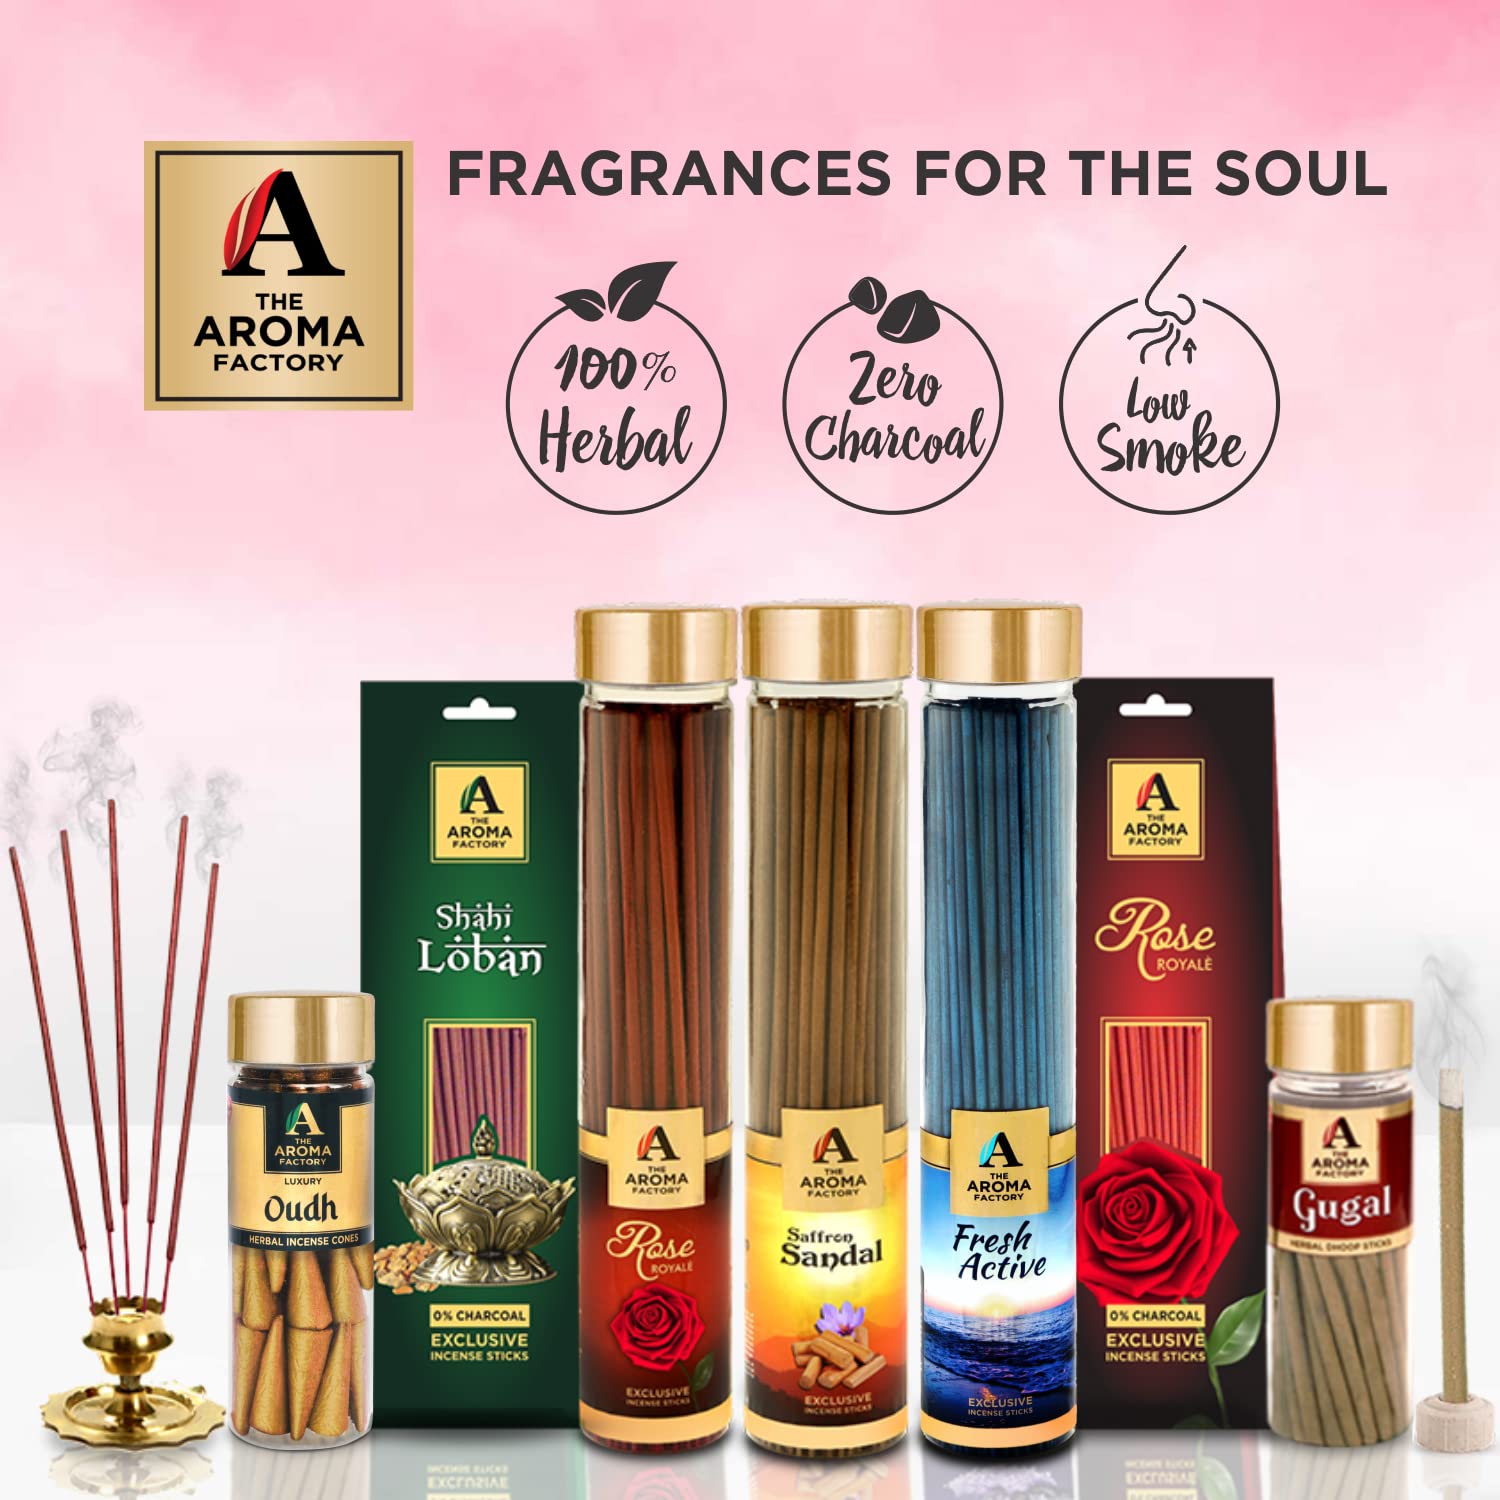 The Aroma Factory Happy Friendship Day Gift Hamper Set (Swad Mix 25 Candy, Incense Fresh Active Agarbatti, Oudh Dhoopcone, Greeting Card, Jute Bag) Gift Item